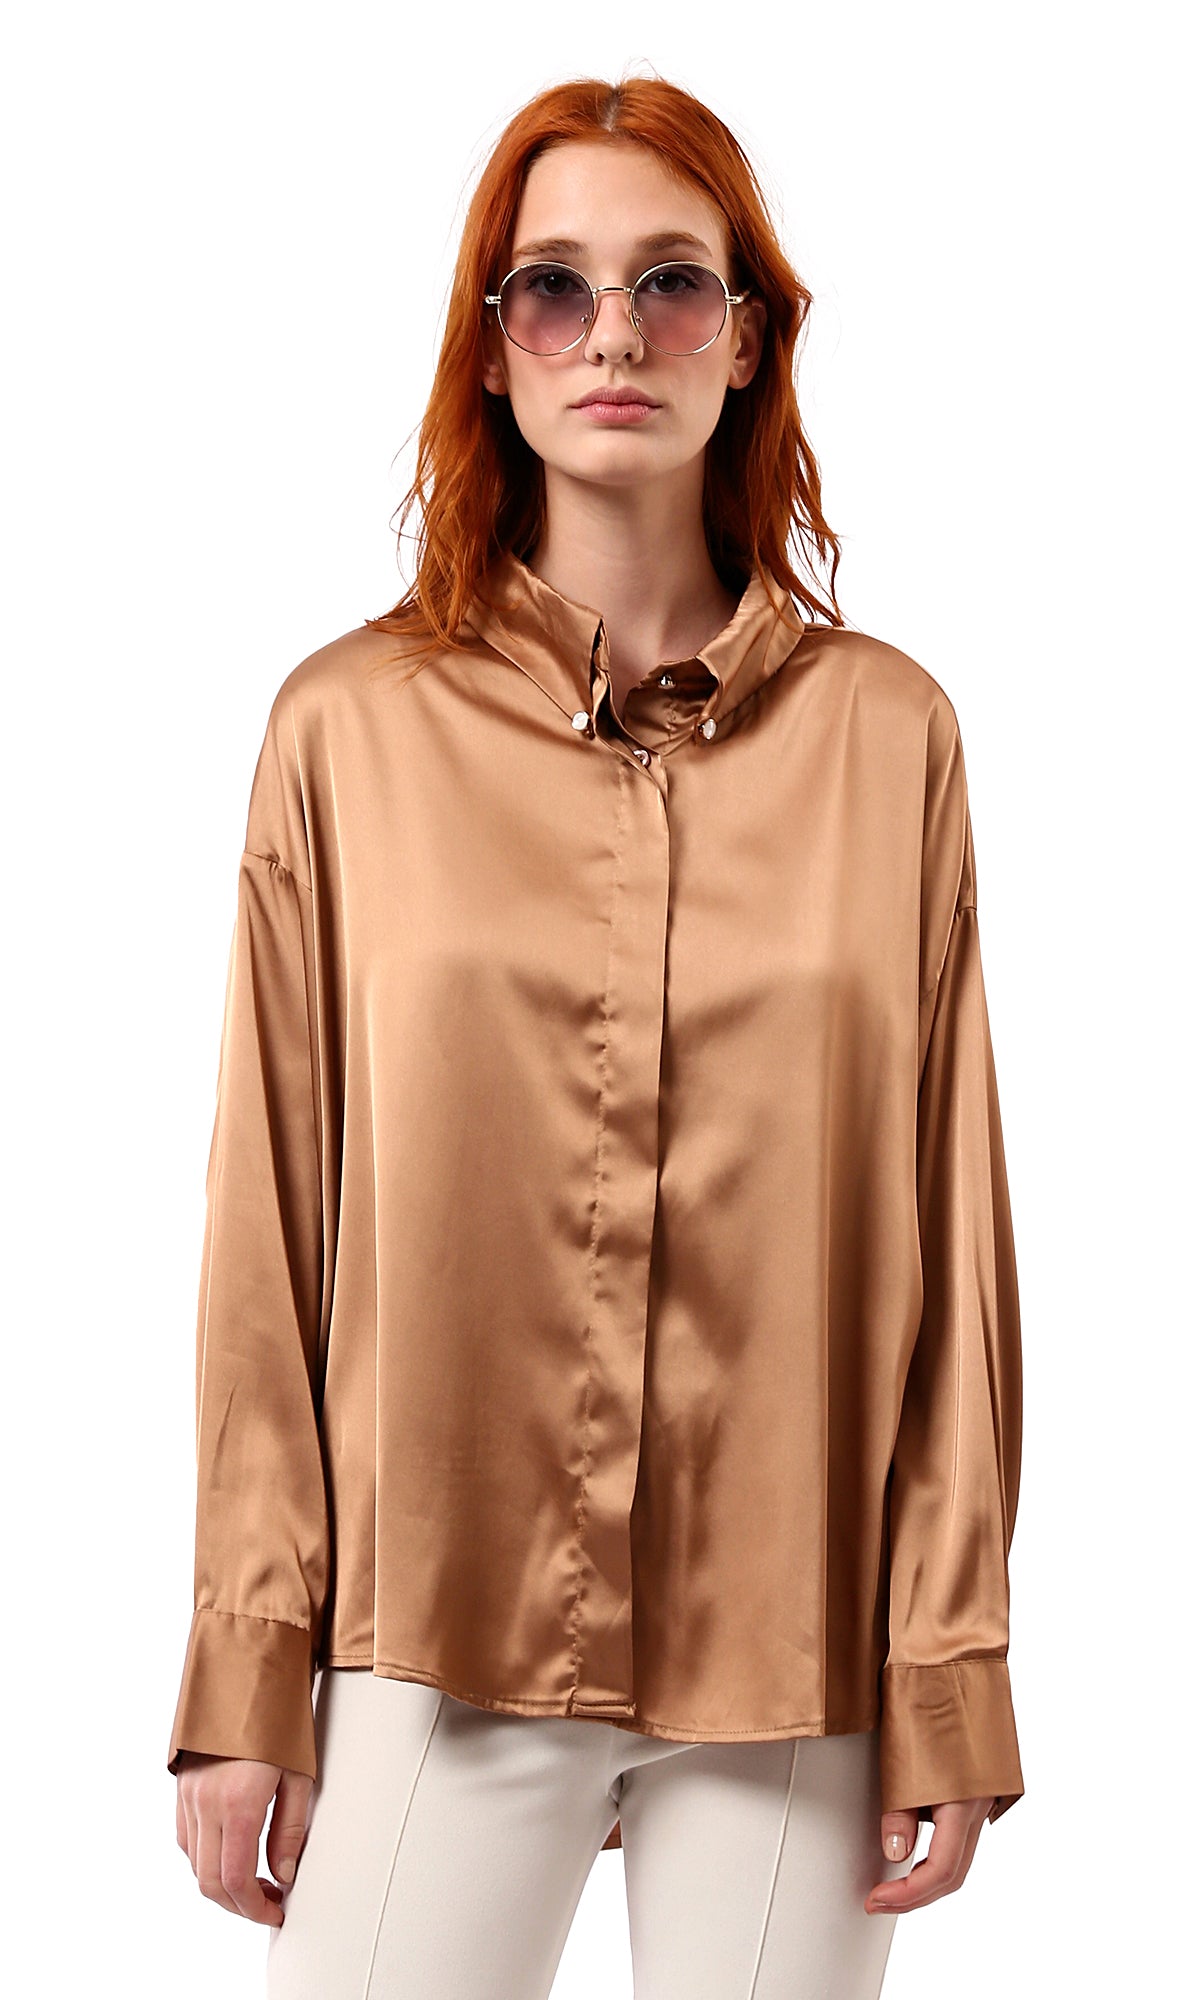 O181651 Shiny Copper Long Sleeves Solid Evening Shirt